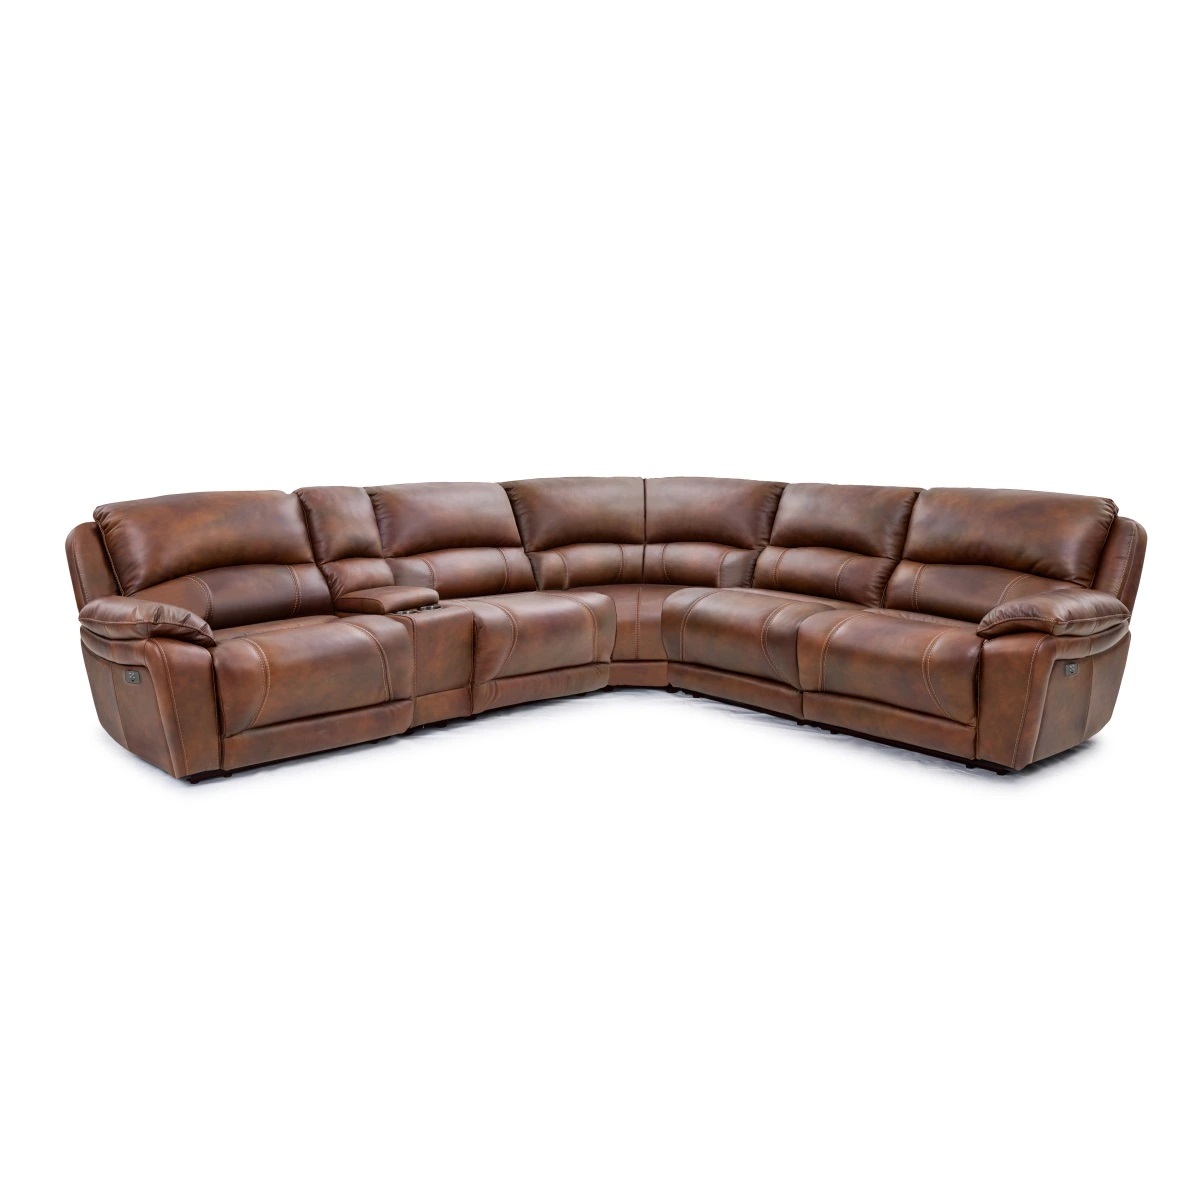 light brown leather sectional